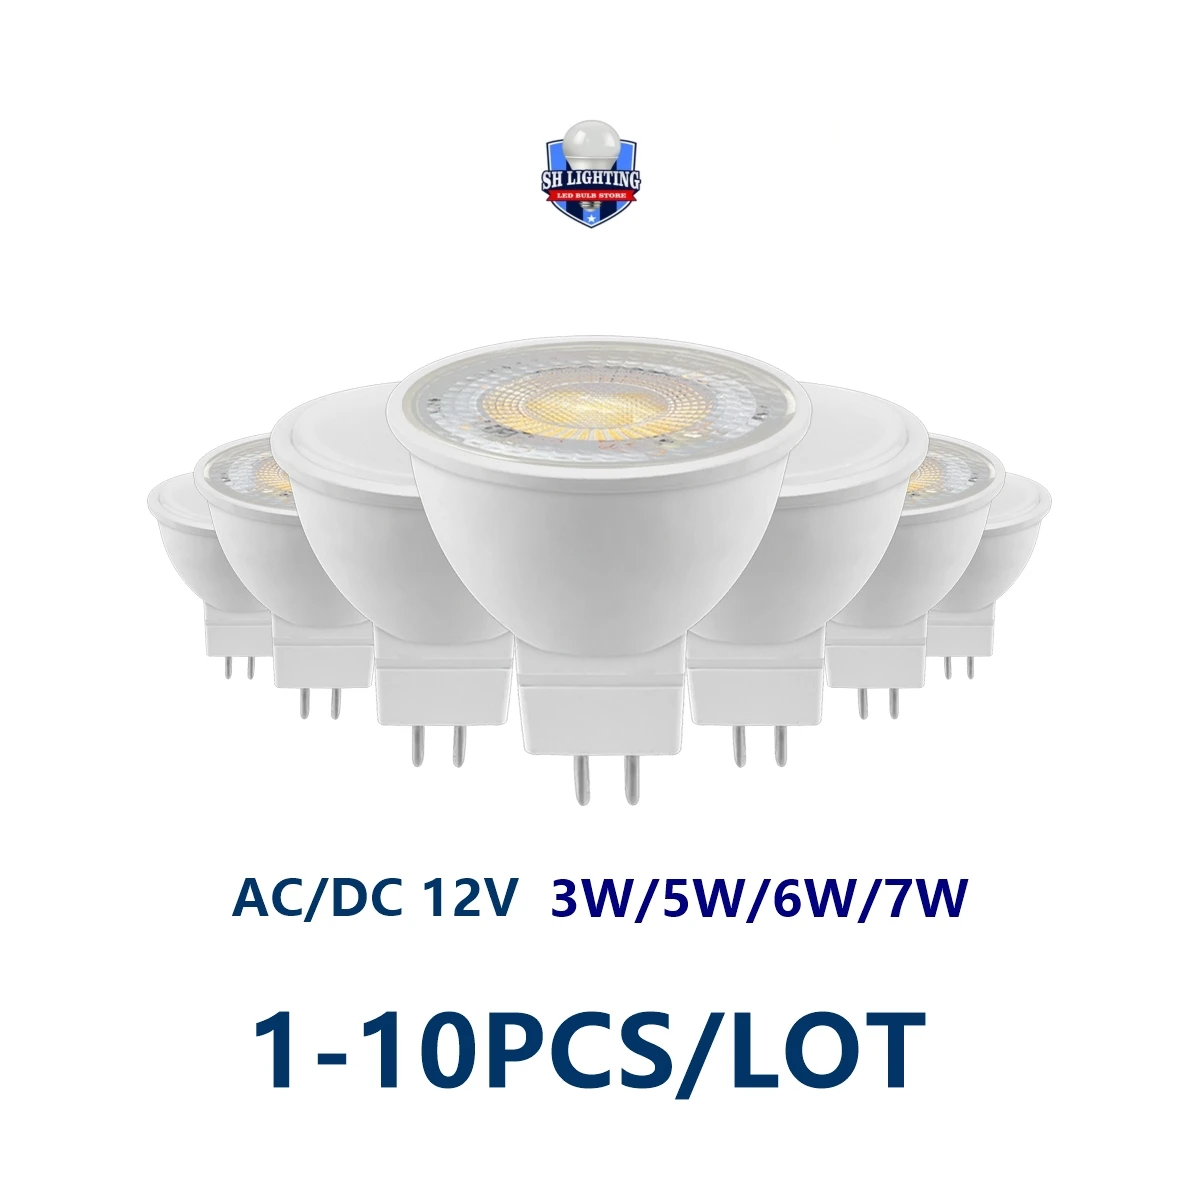 

LED low voltage AC/DC12V spotlight MR16 GU5.3 Luminous Angle 38/120 degrees 3W-7W 3000K-6000K can replace 20W 50W halogen lamp